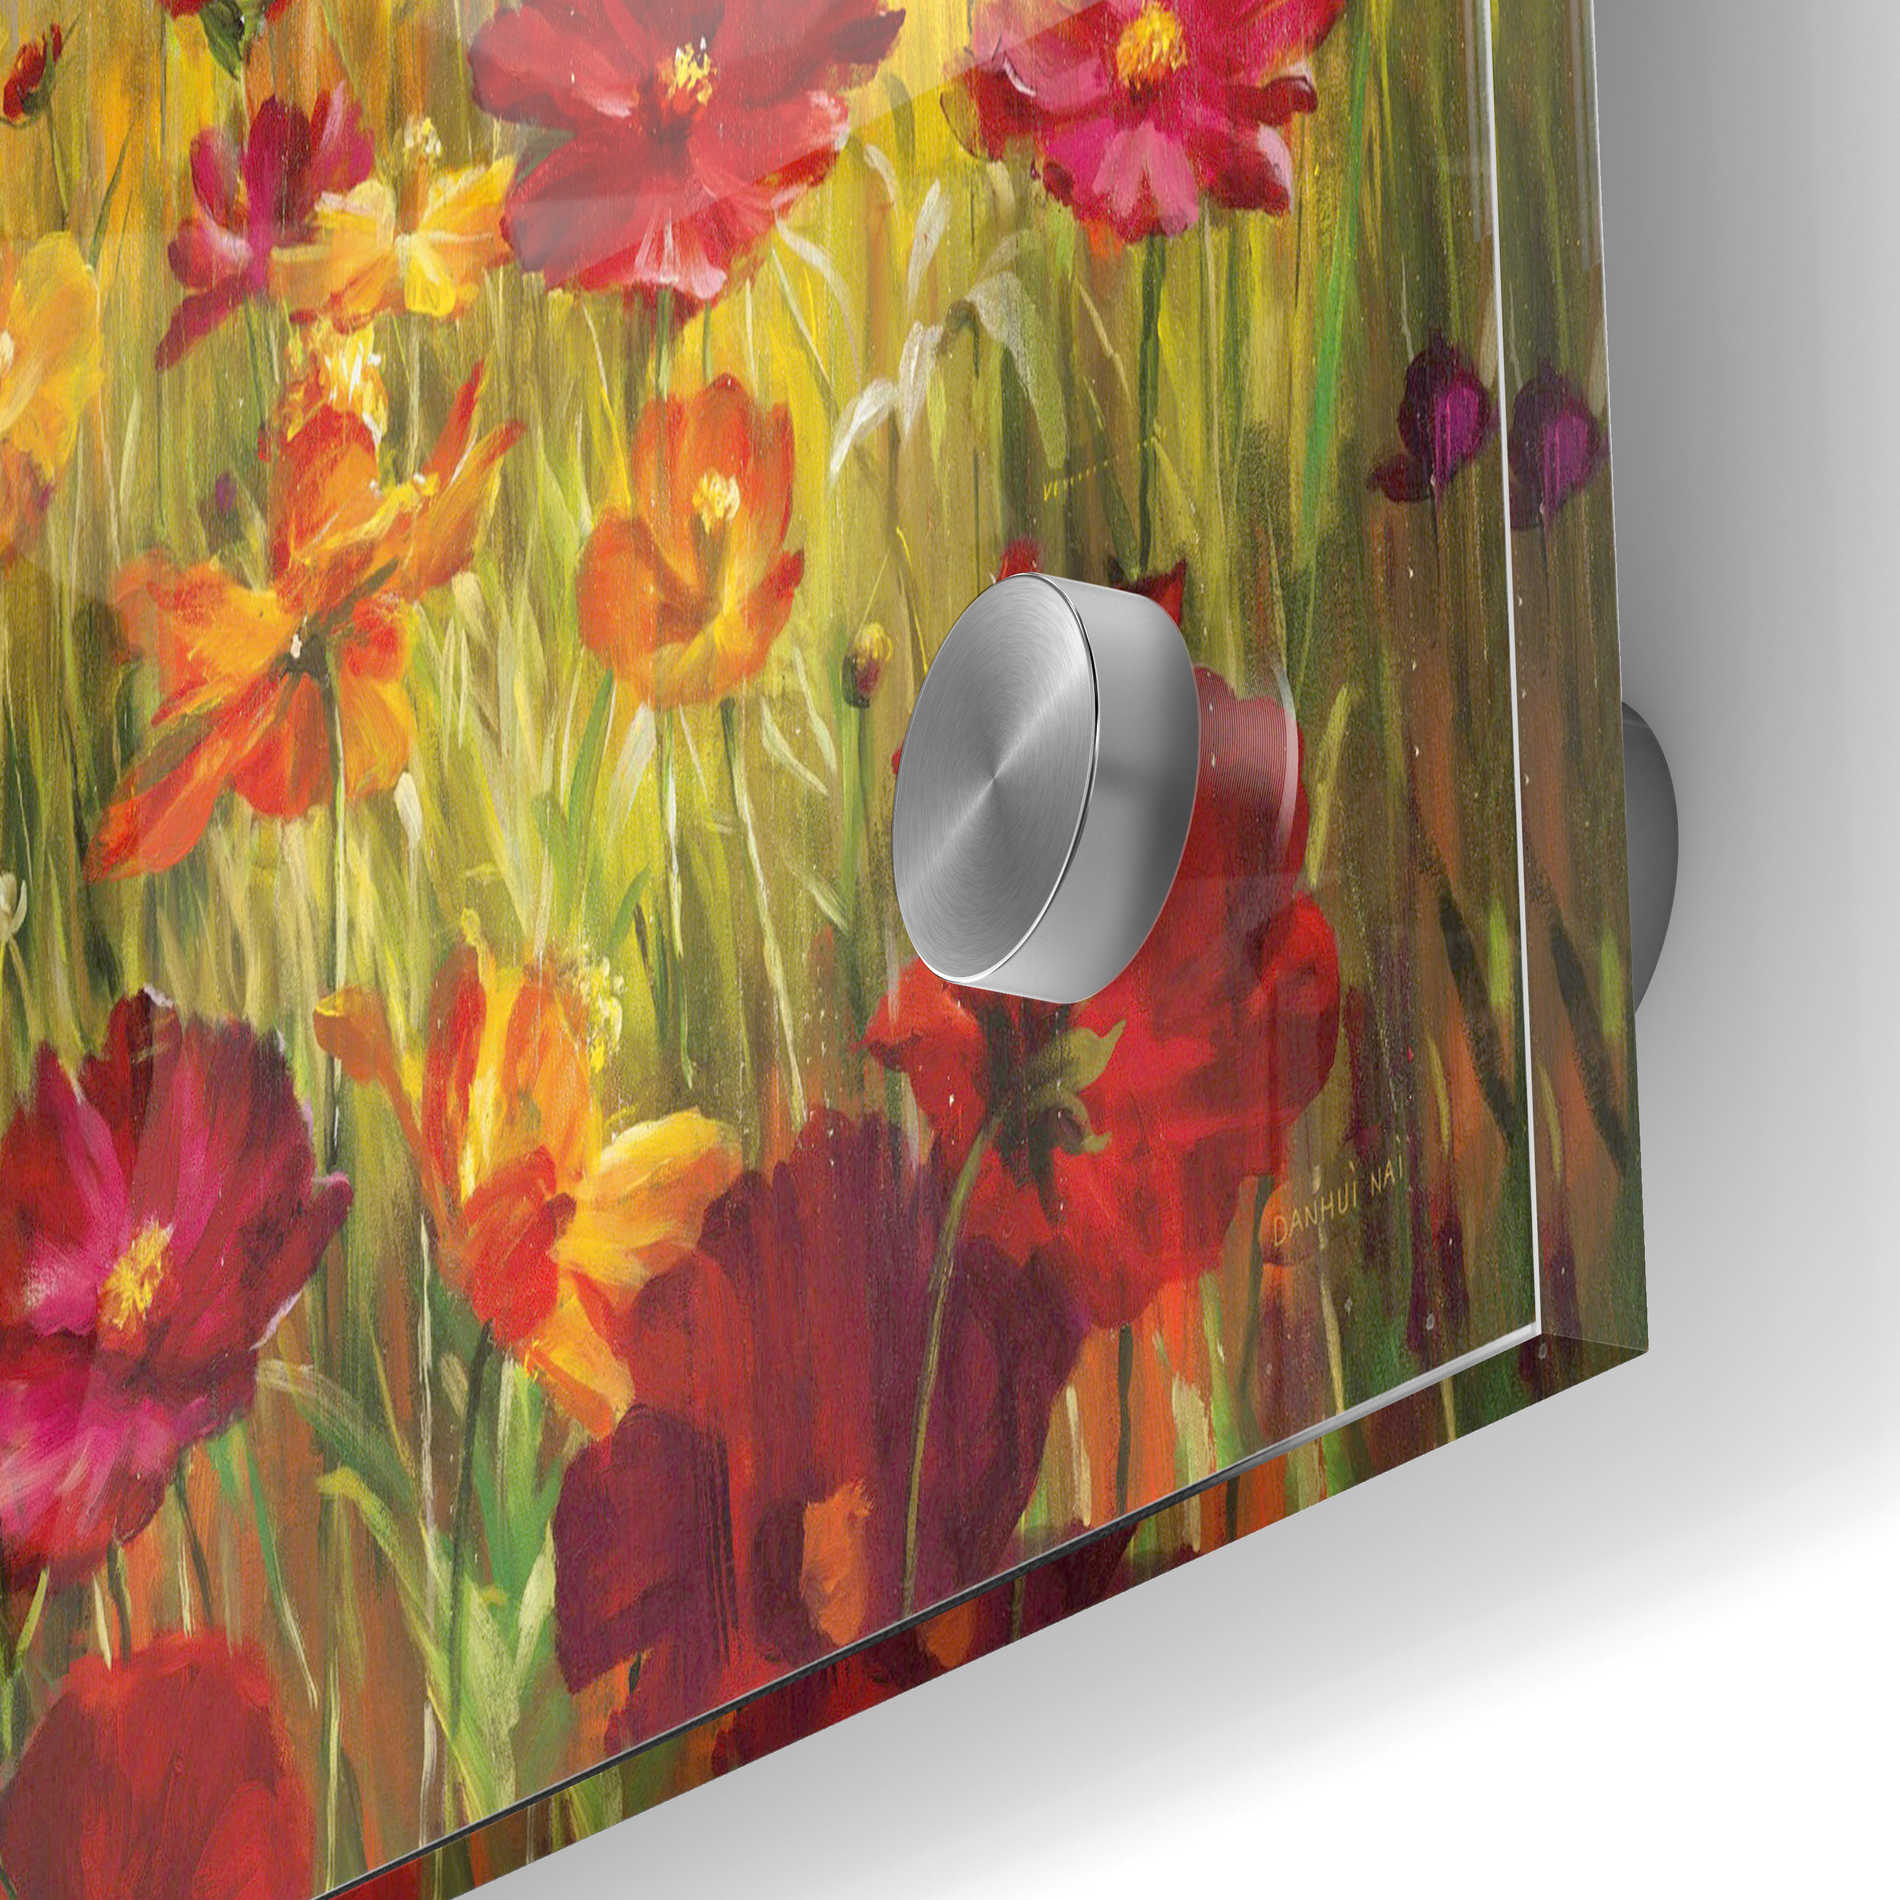 Epic Art 'Cosmos in the Field' by Danhui Nai, Acrylic Glass Wall Art,24x36